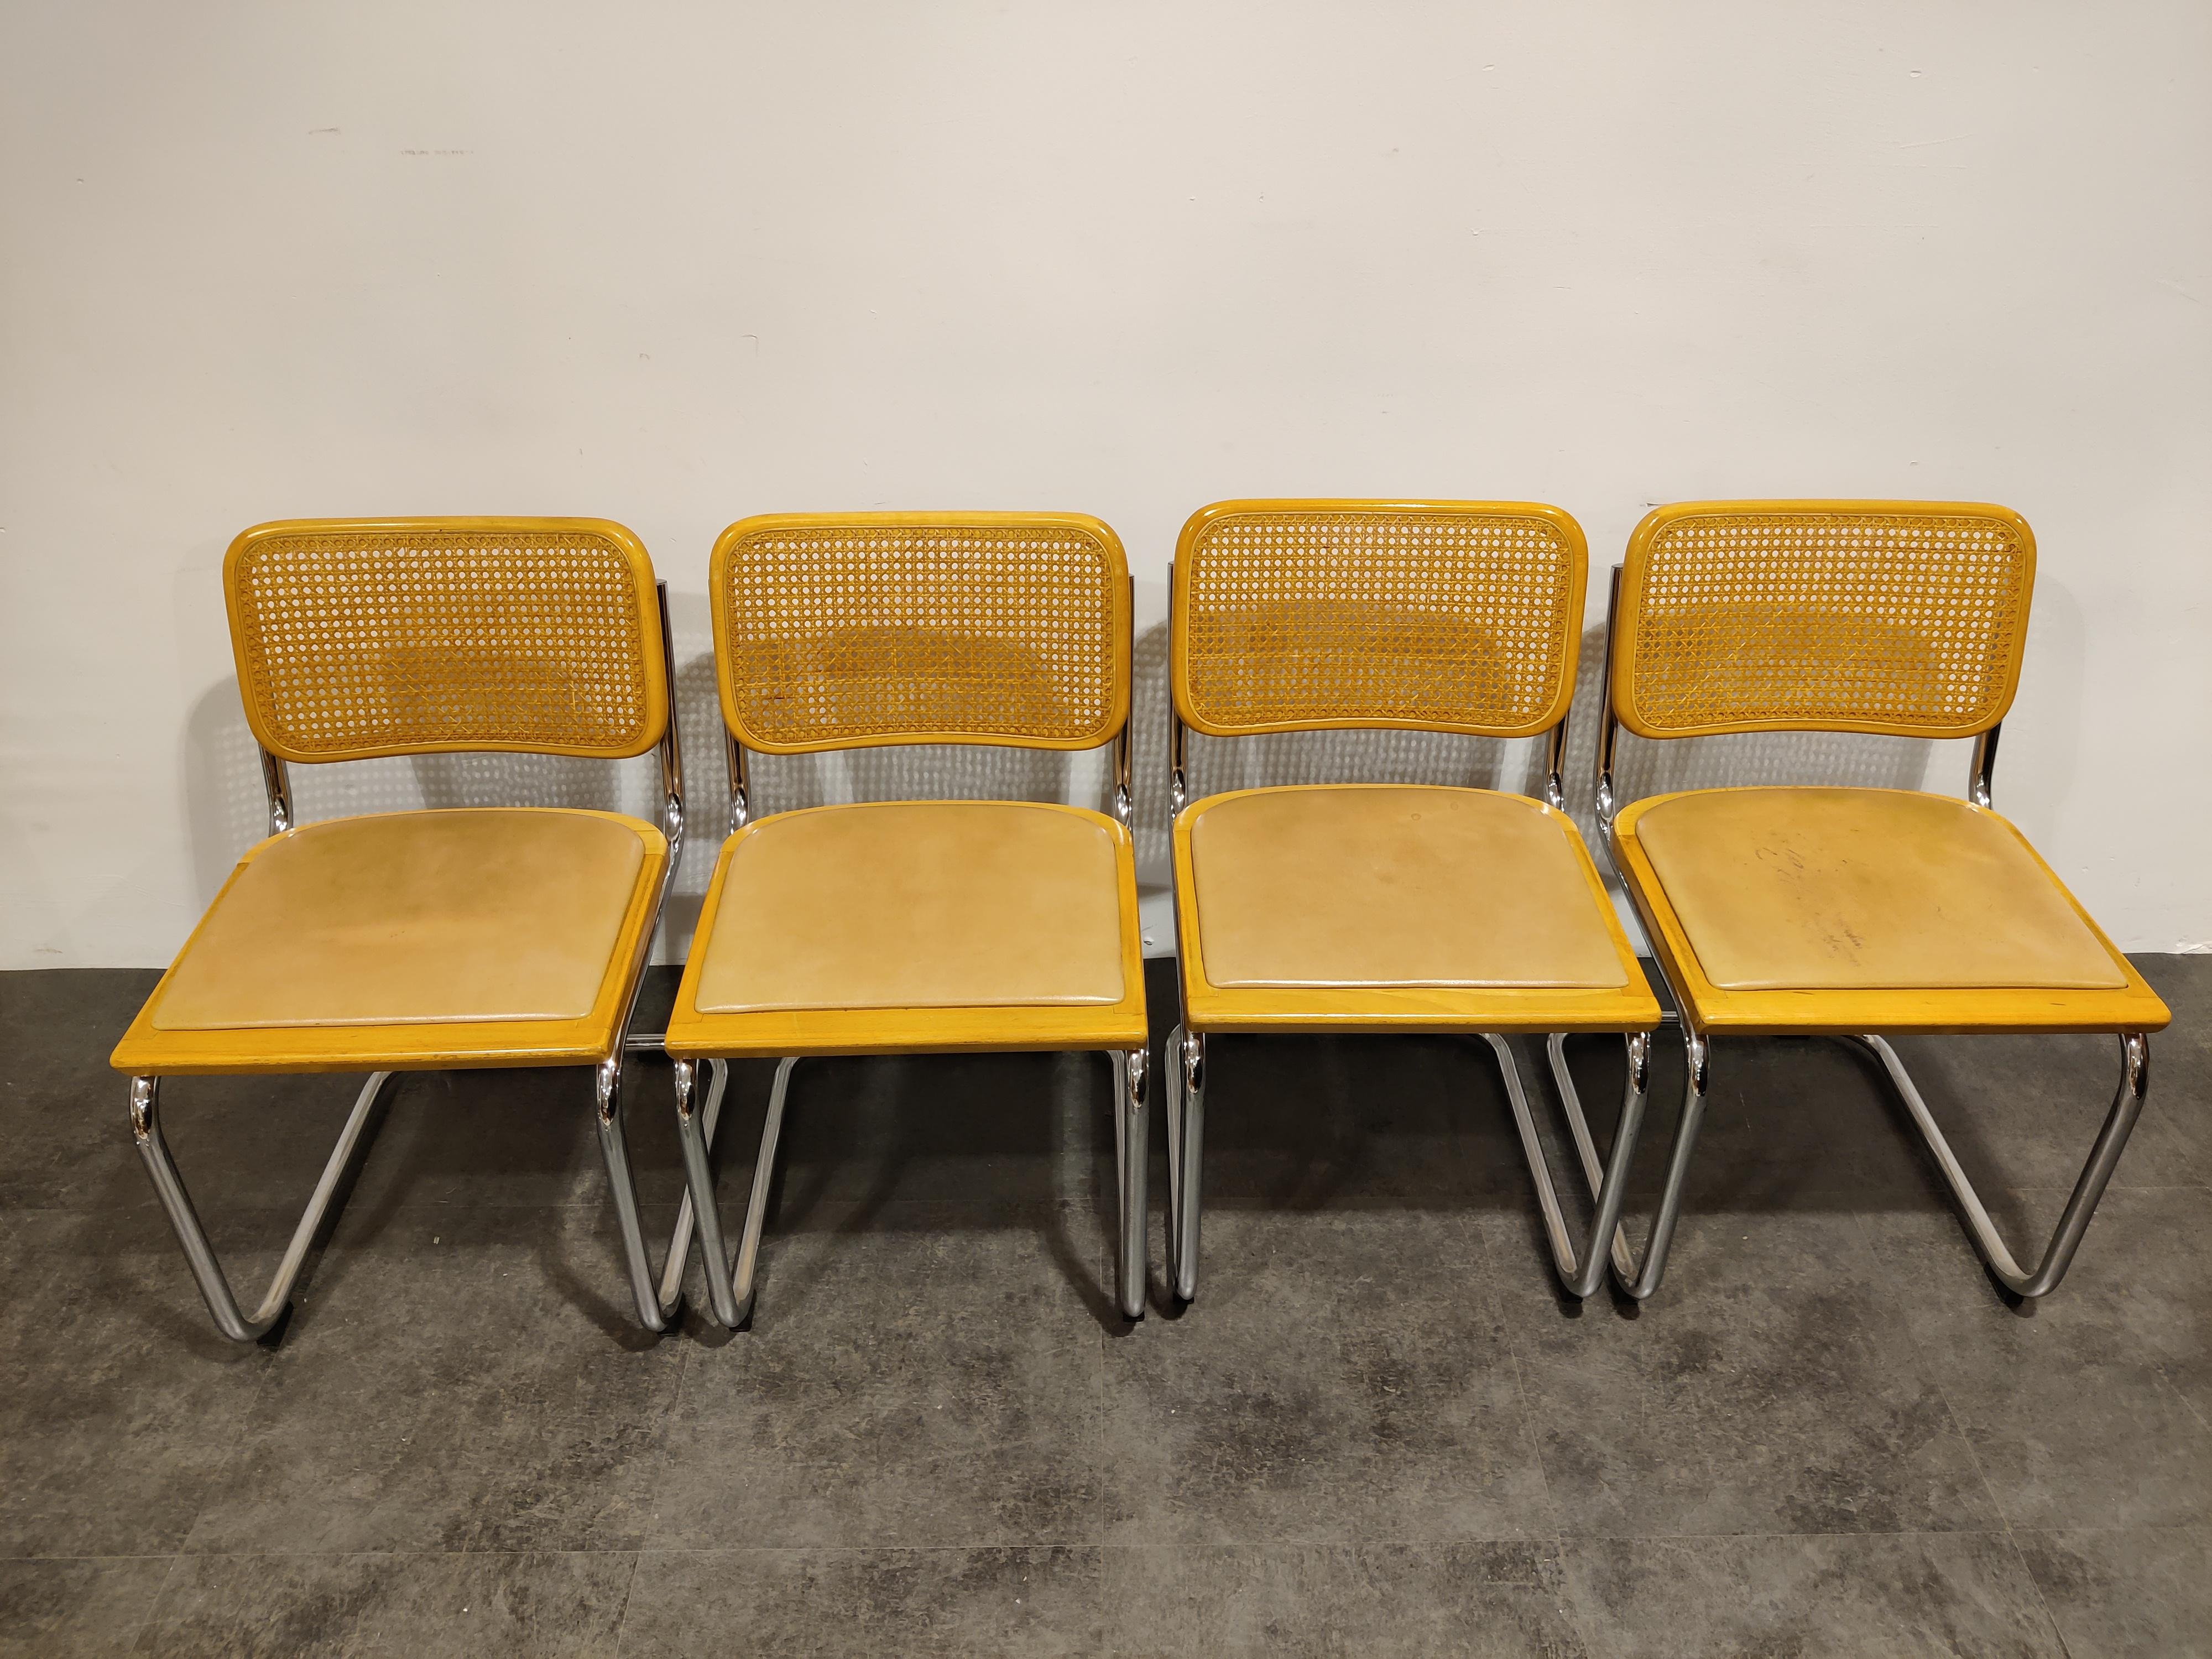 Italian Vintage Marcel Breuer Cesca Style Chairs Set of 8, Made in Italy, 1970s